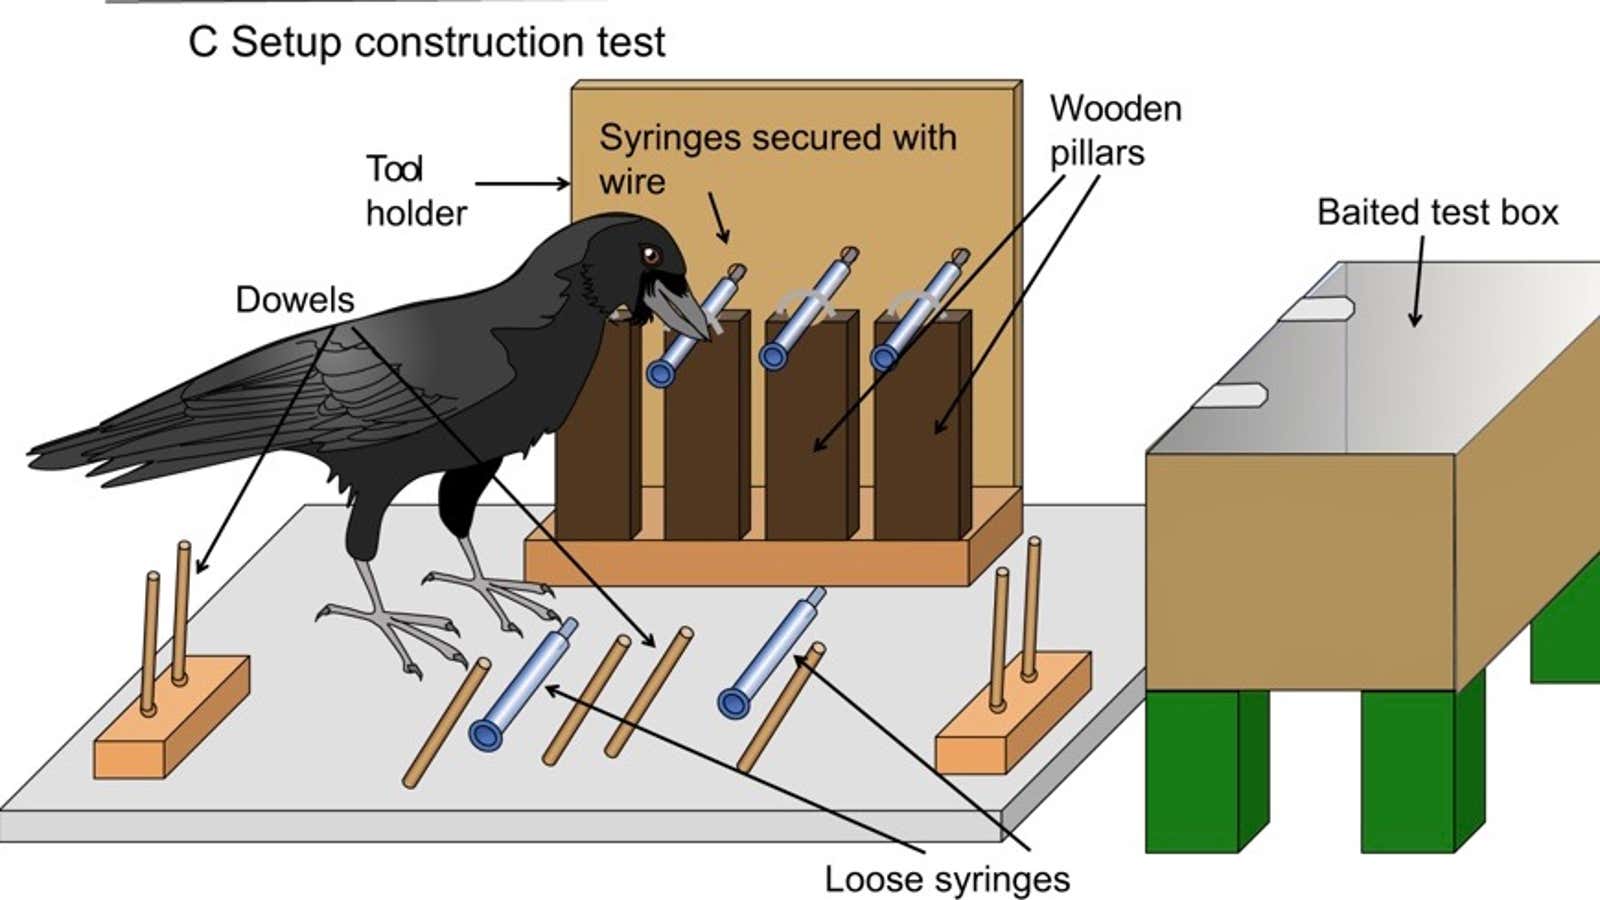 Four crows innovated tools to retrieve food.